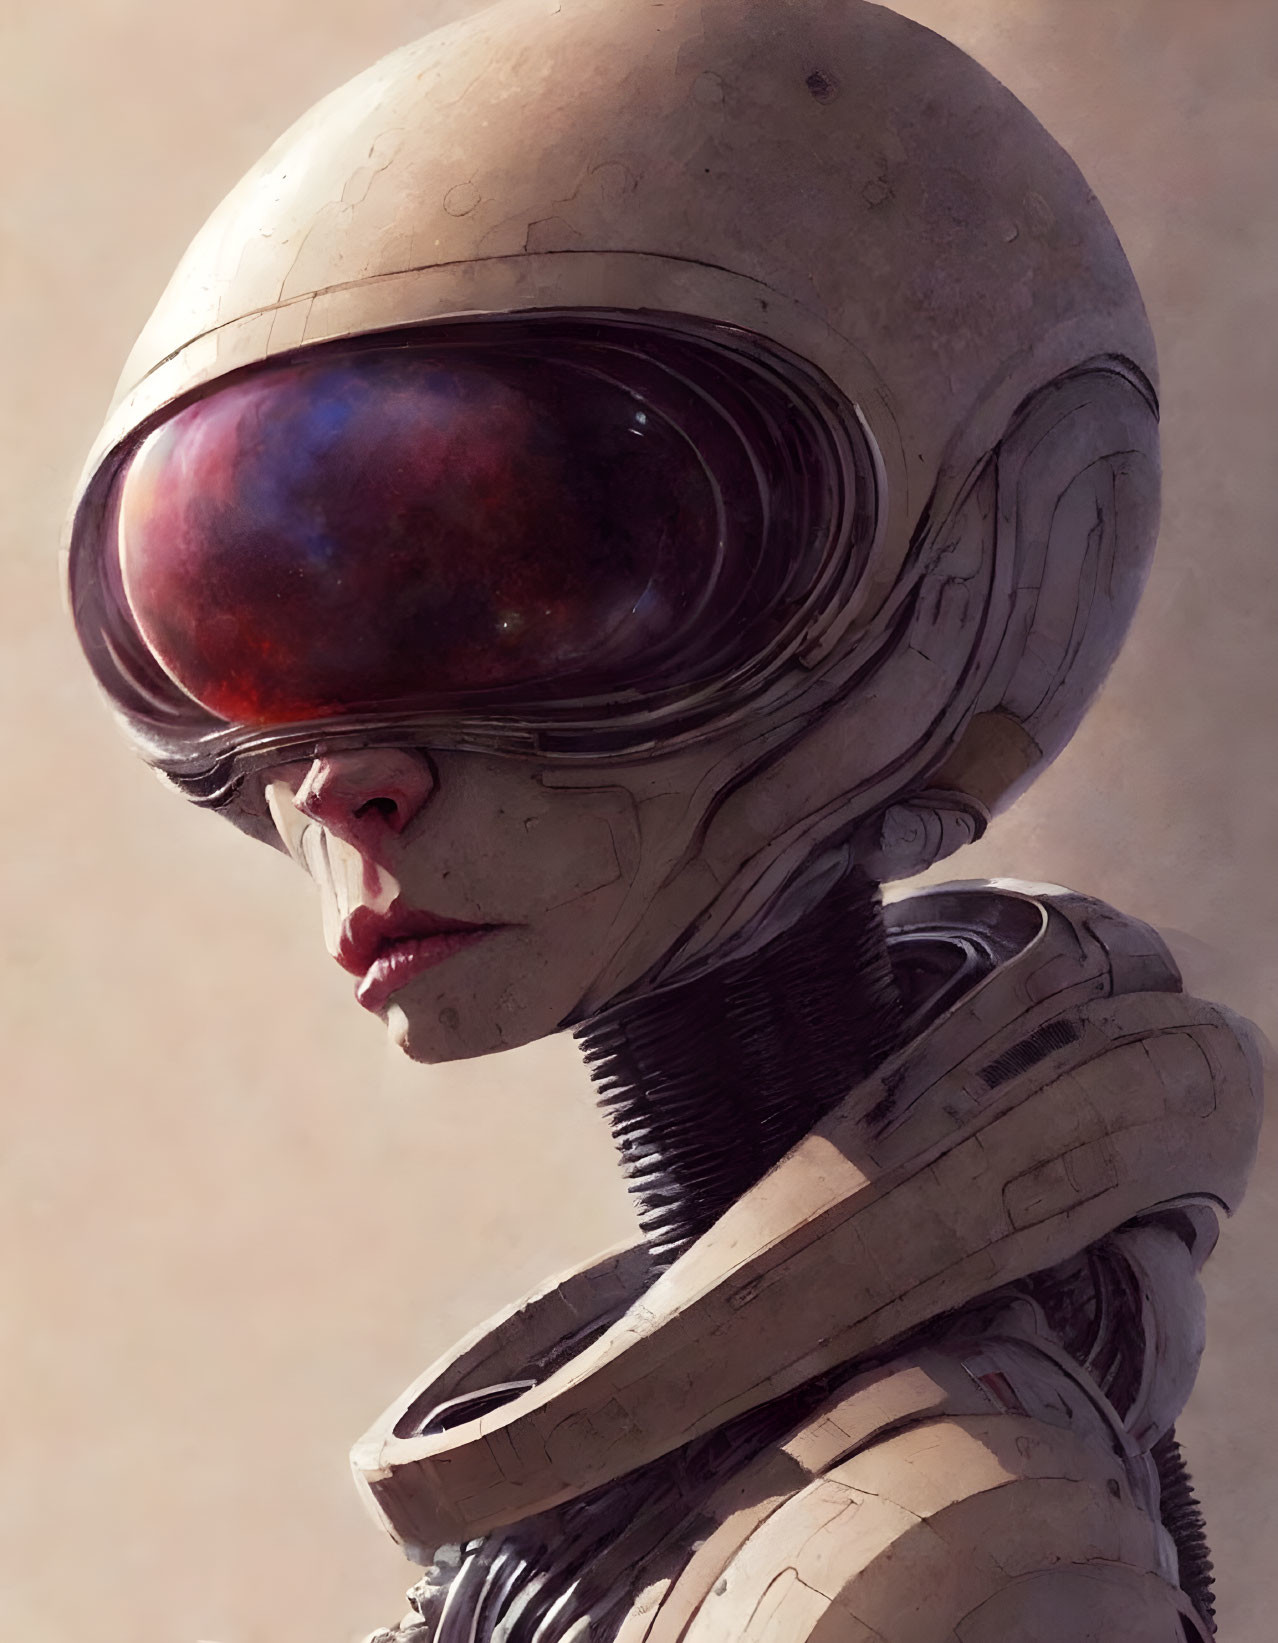 Detailed illustration of person in futuristic helmet with reflective visor